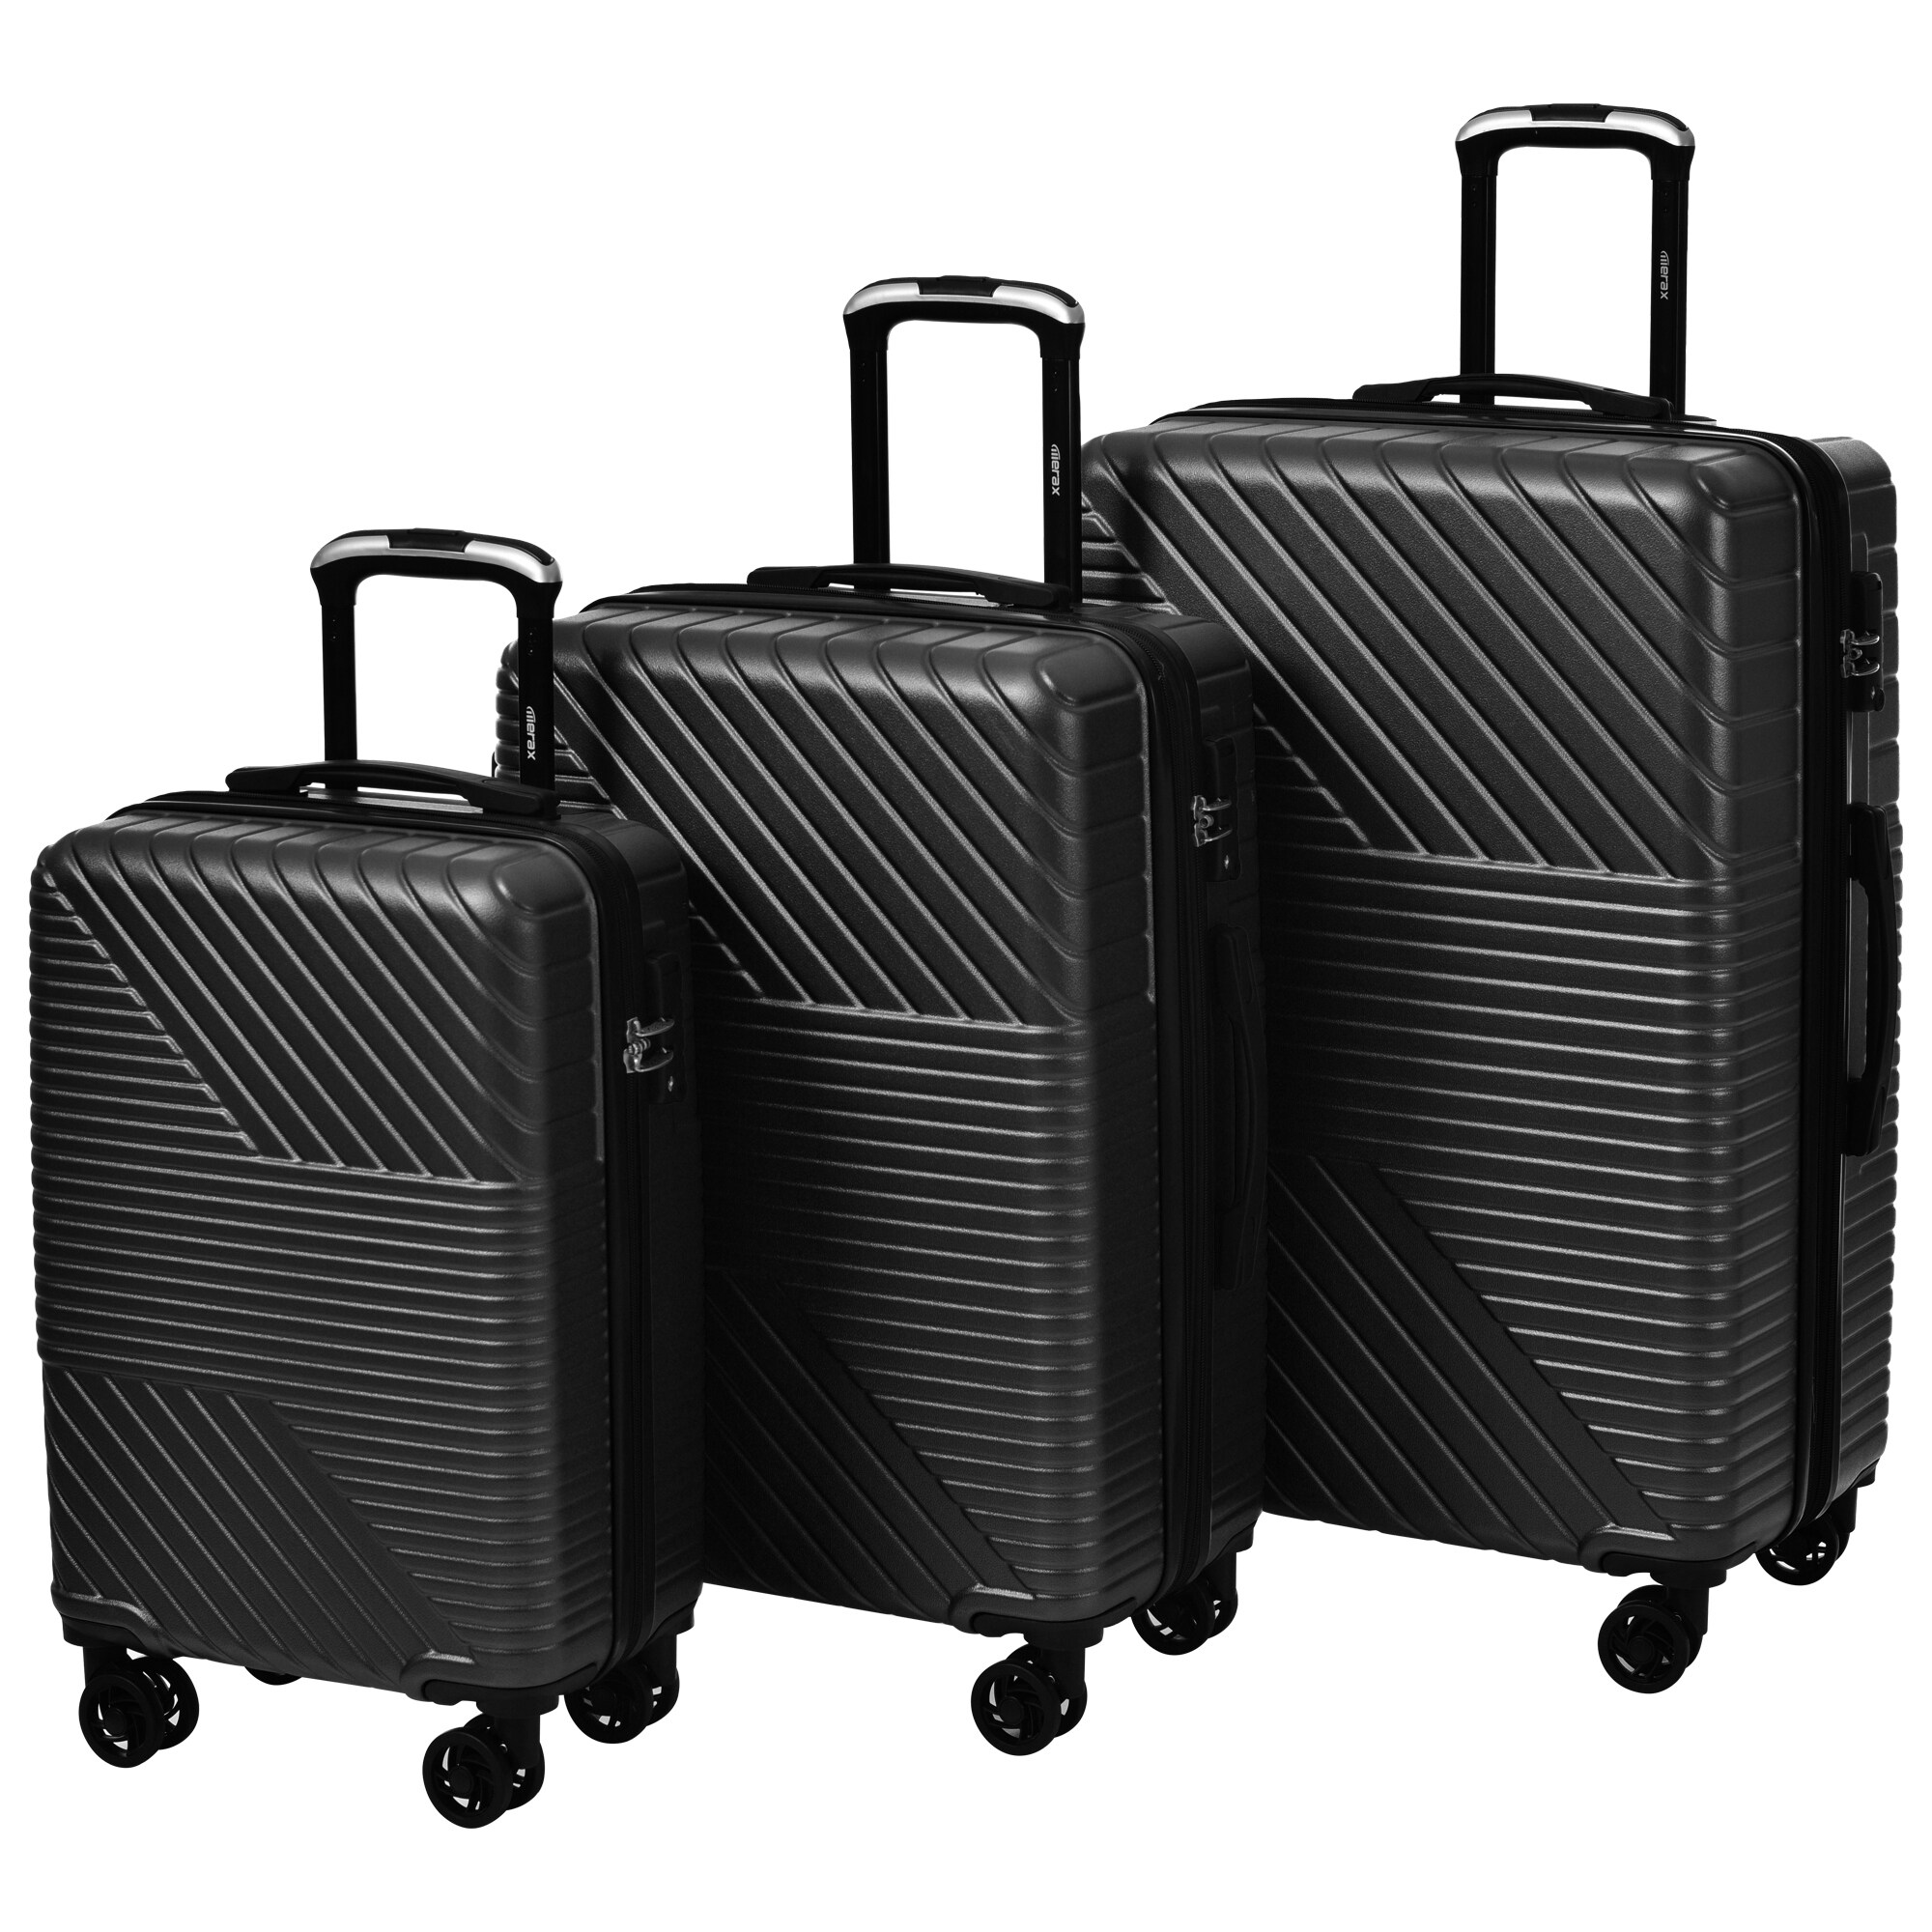 LONG VACATION Luggage Sets 20 IN Carry on Suitcase ABS Handshell Luggage 3  Piece Set with TSA Lock Spinner Wheels (WHITE-BROWN, 20-Inch)